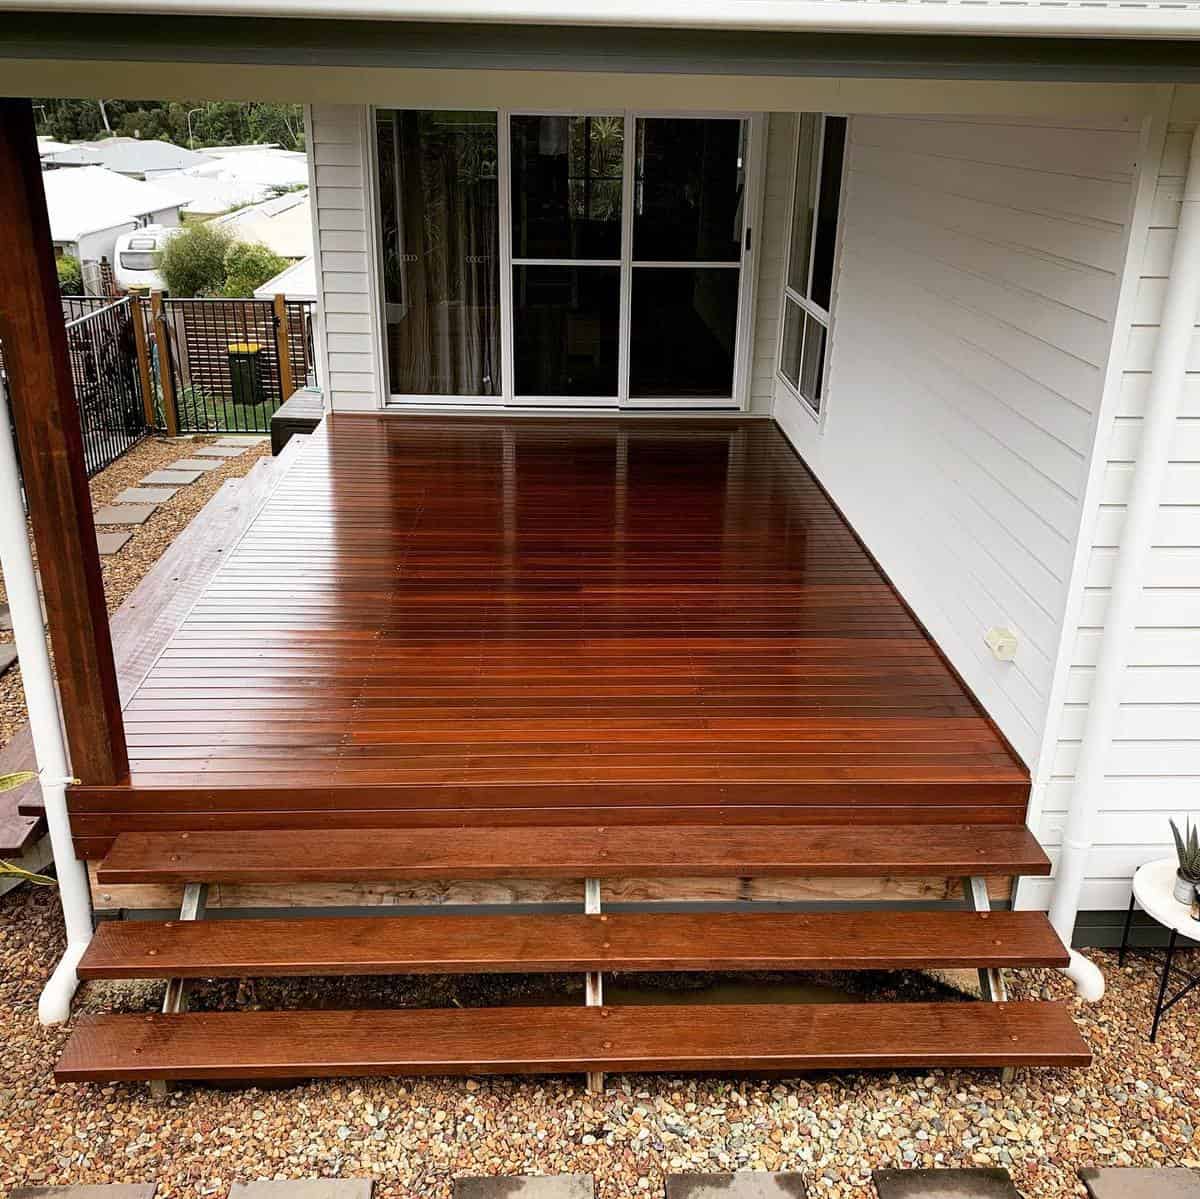 Varnished wooden deck in the backyard